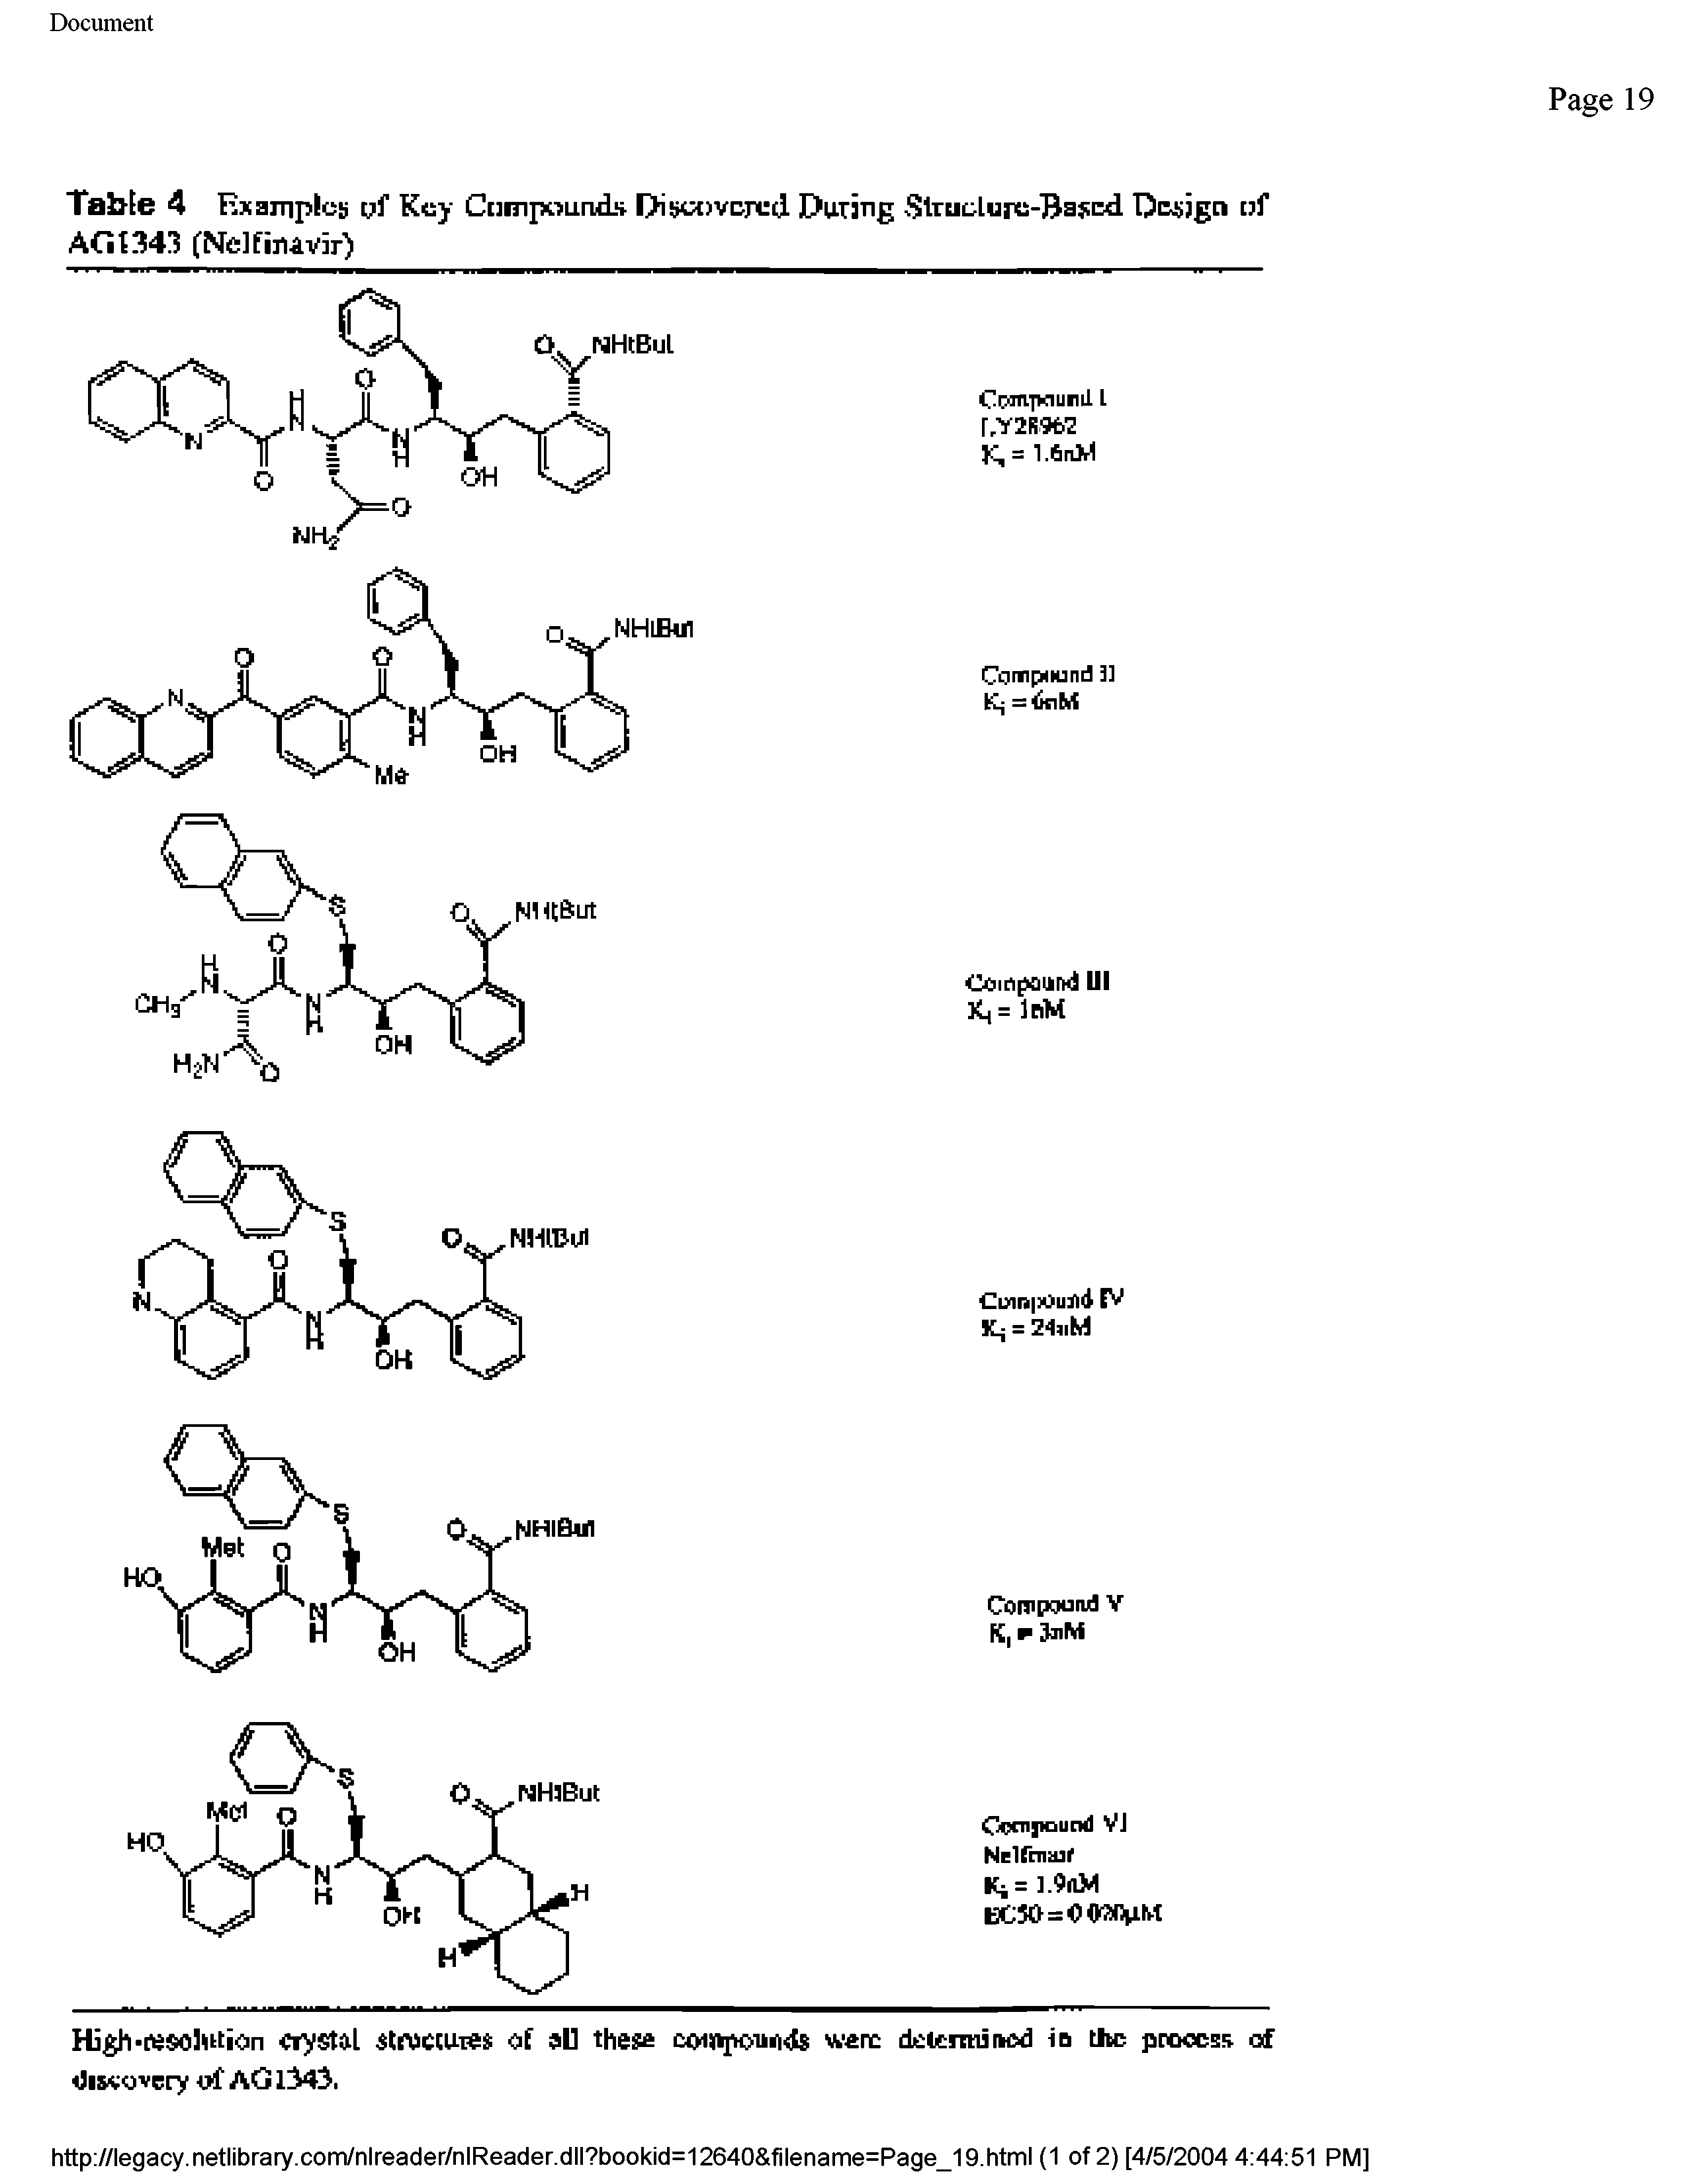 Table 4 Examples yf Key Compounds Discovered During StrucLure-Bajicd Design uf AG 1343 fNelfinavir)...